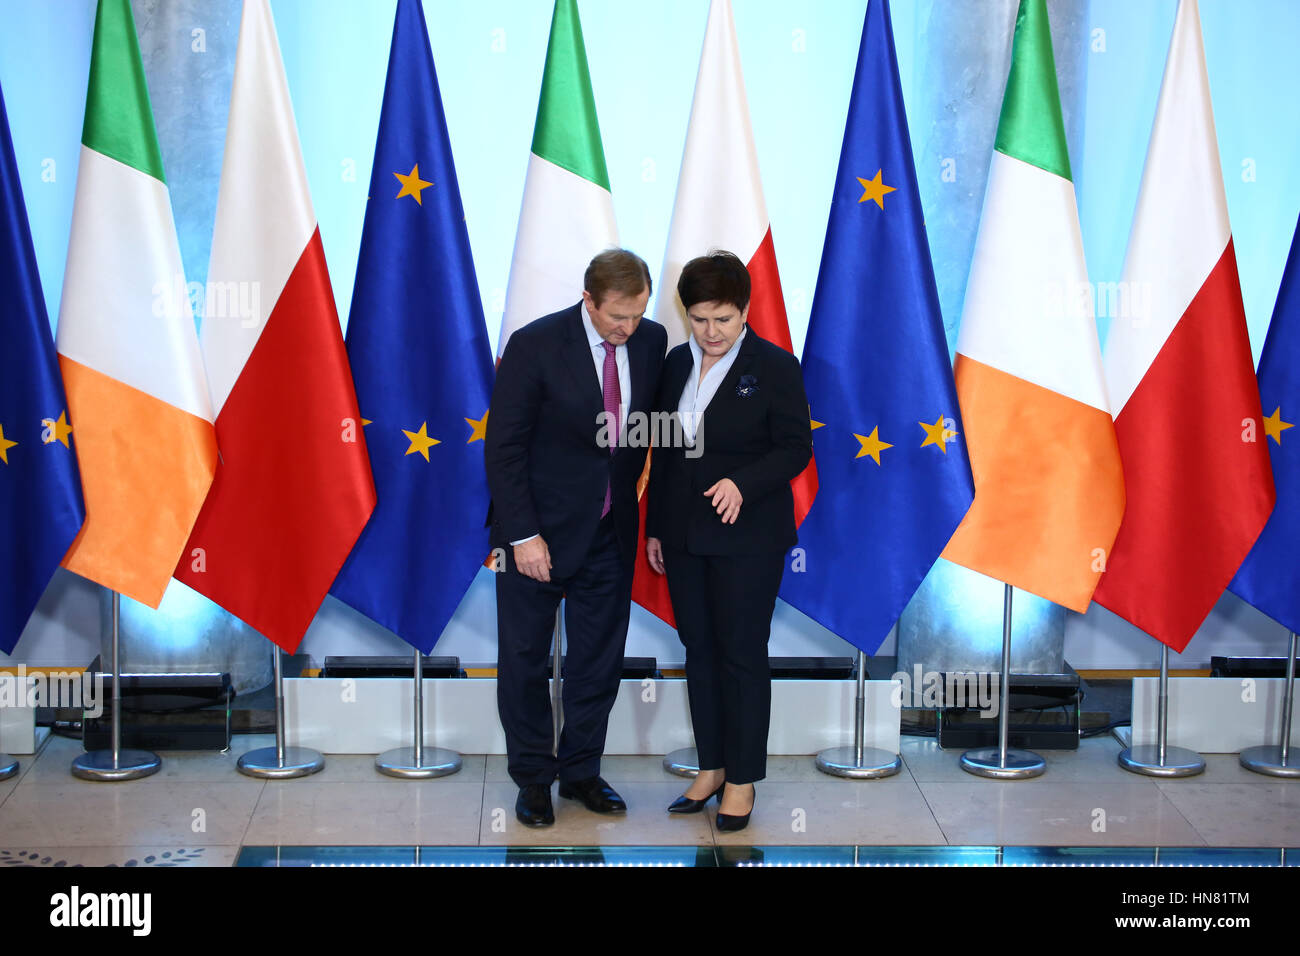 Warsaw, Poland. 9th Feb, 2017. Irish Prime Minister Enda Kenny was received by PM Beata Szydlo for official visit. Credit: Jake Ratz/Alamy Live News Stock Photo